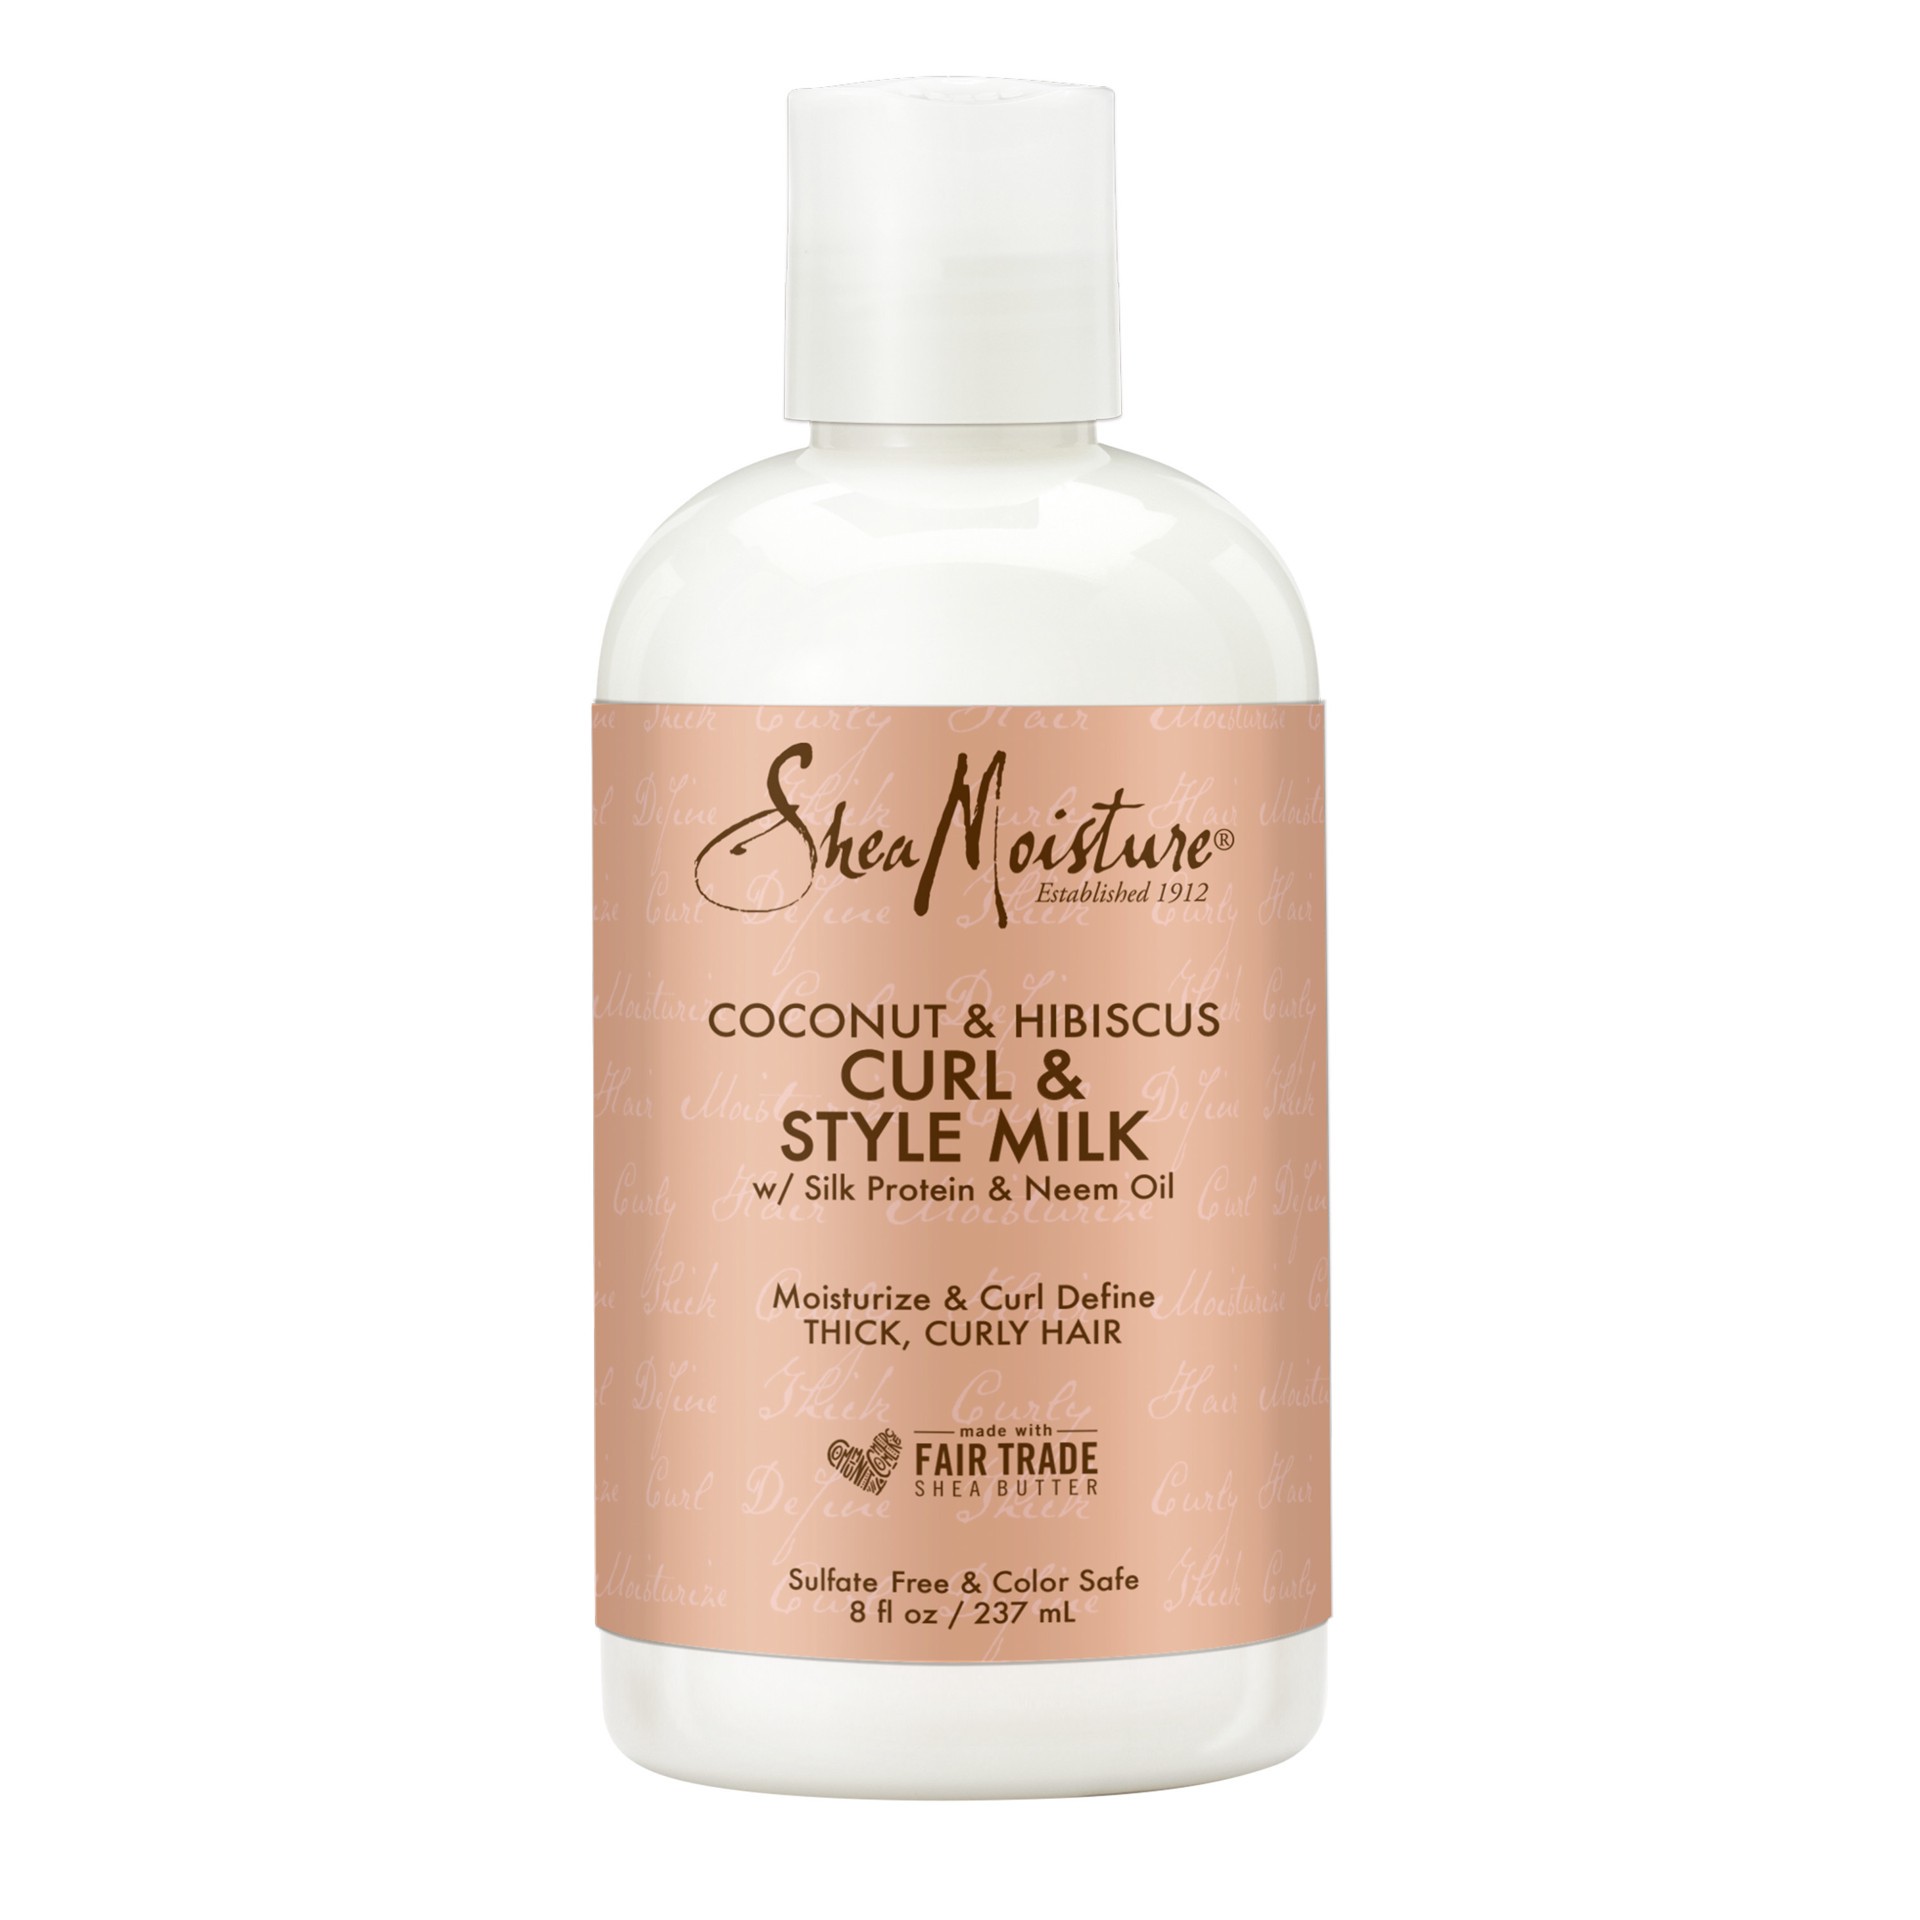 slide 1 of 73, SheaMoisture Curl & Style Milk Coconut & Hibiscus with Silk Protein & Neem Oil, 8 oz, 8 oz